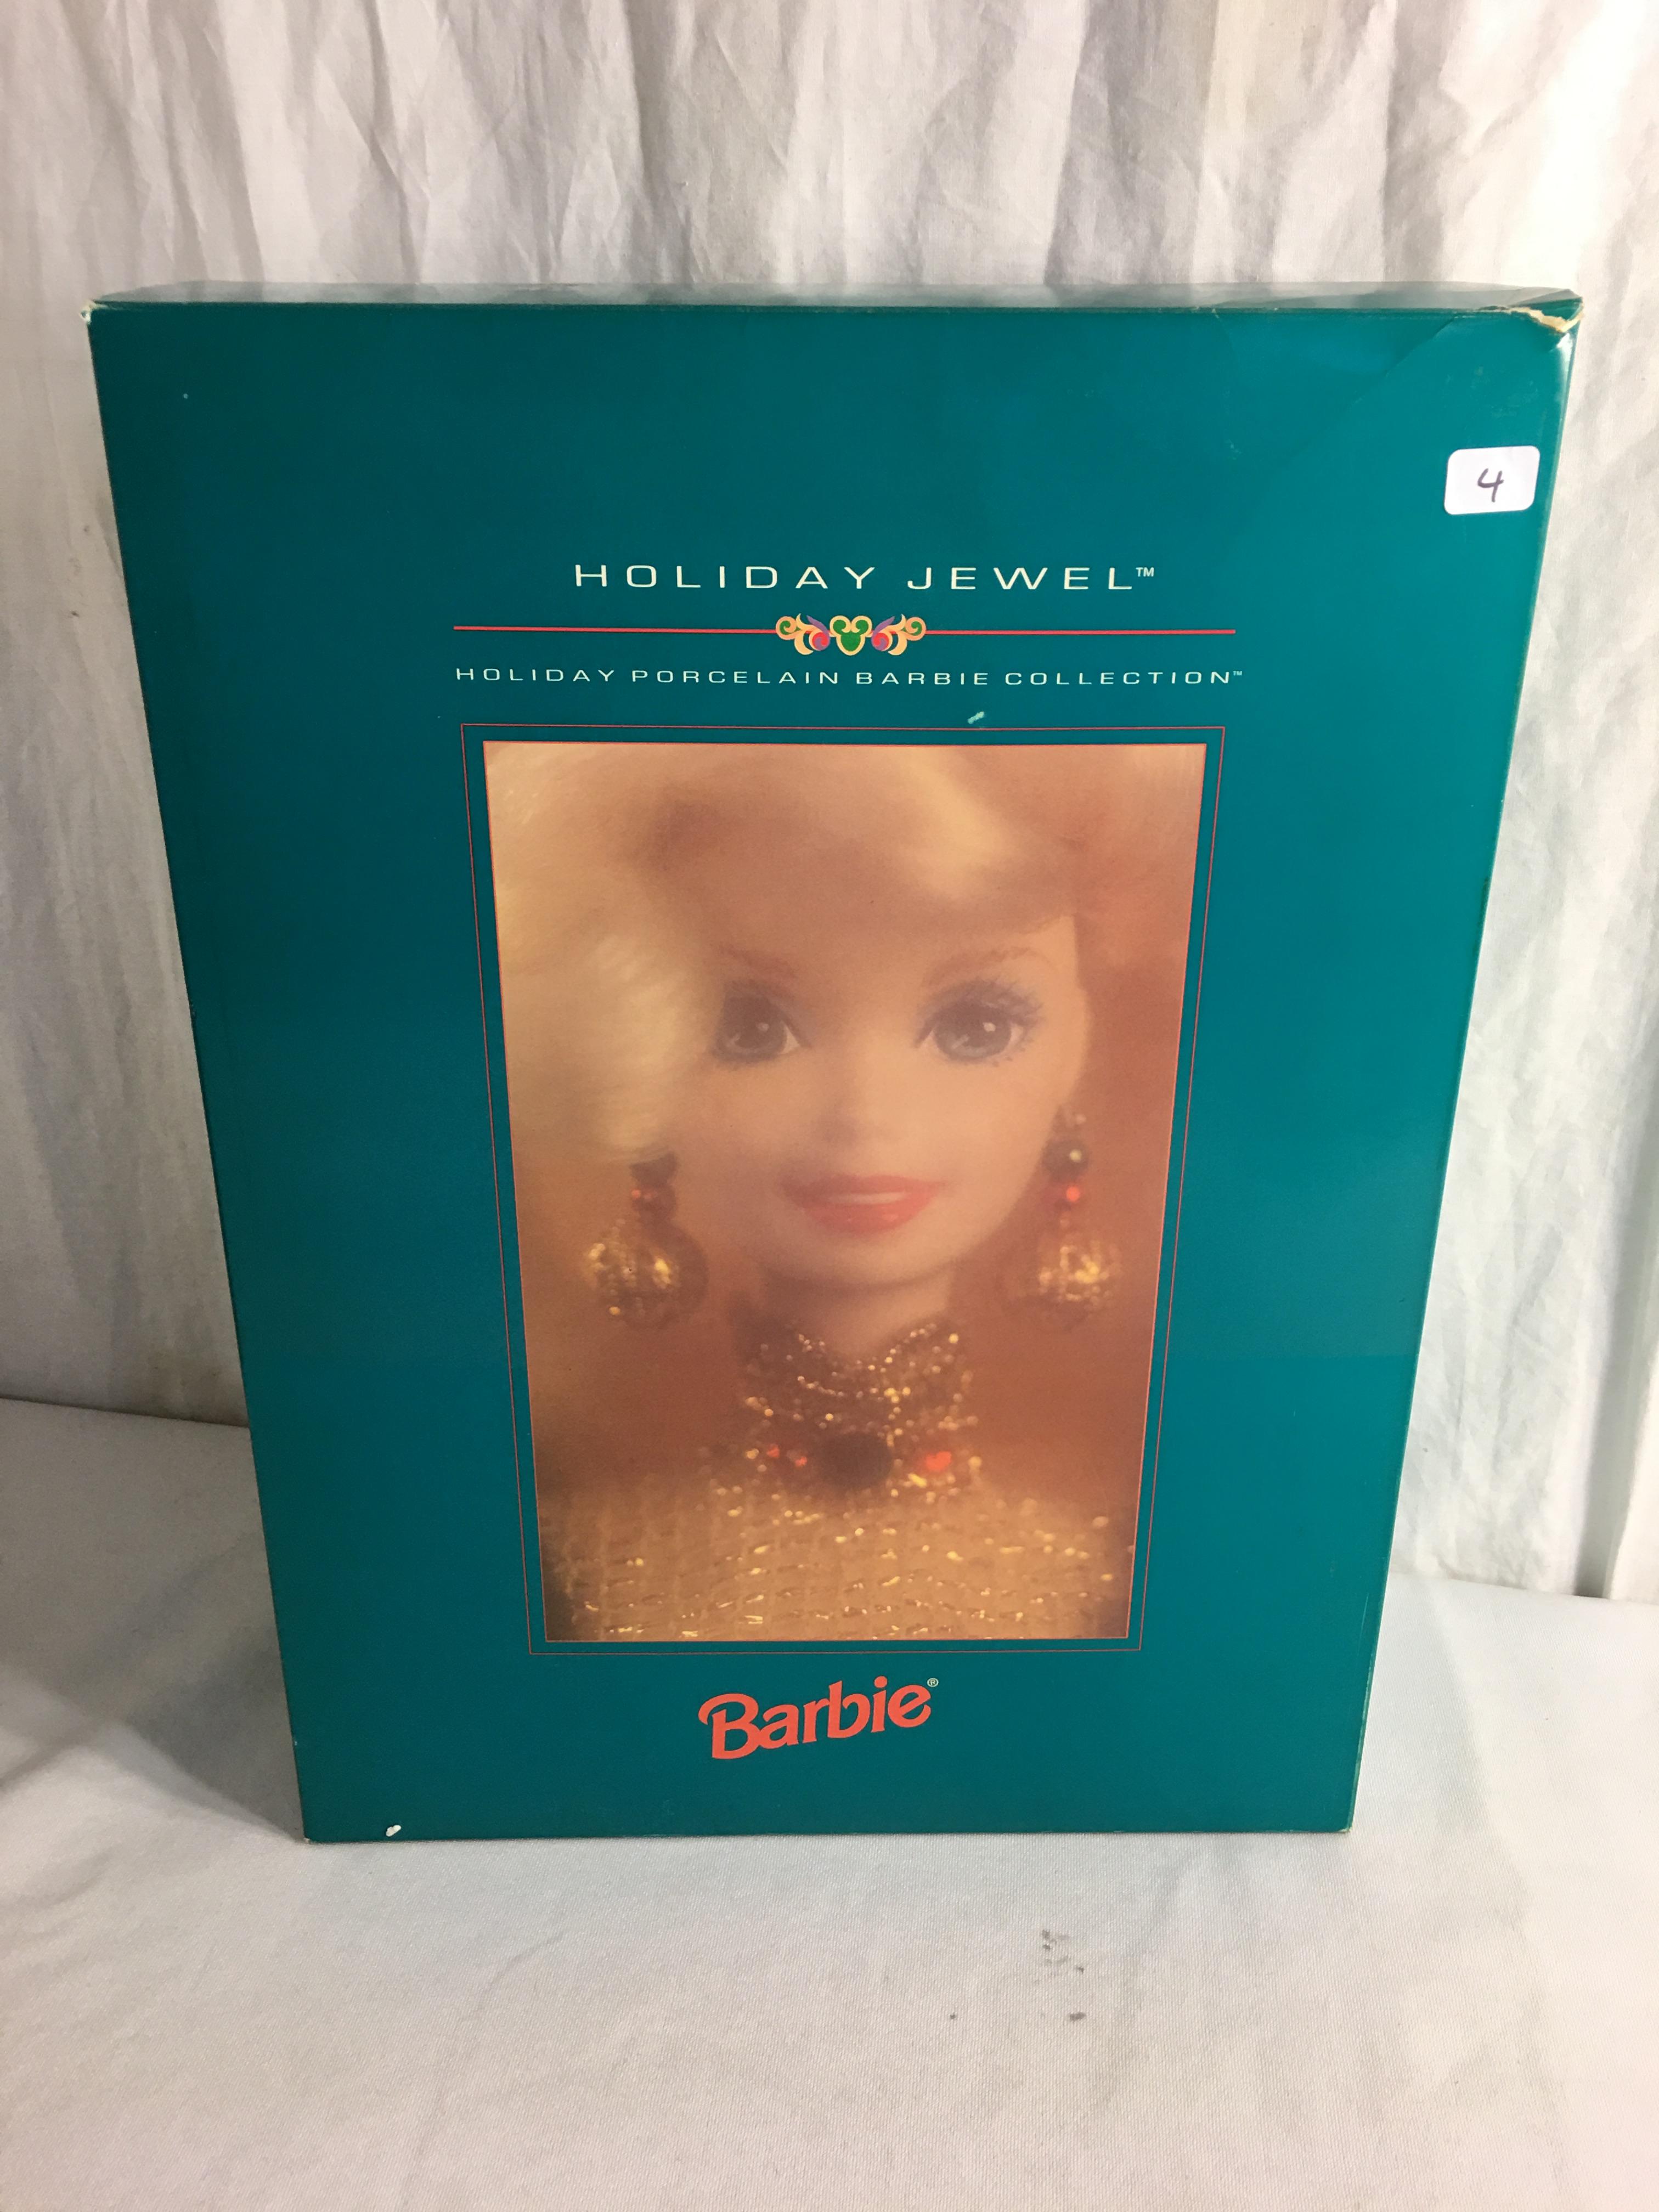 Collector Holiday Jewel Barbie Mattel Porcelain Barbie Collection Doll Box has Damage 16"tall Box